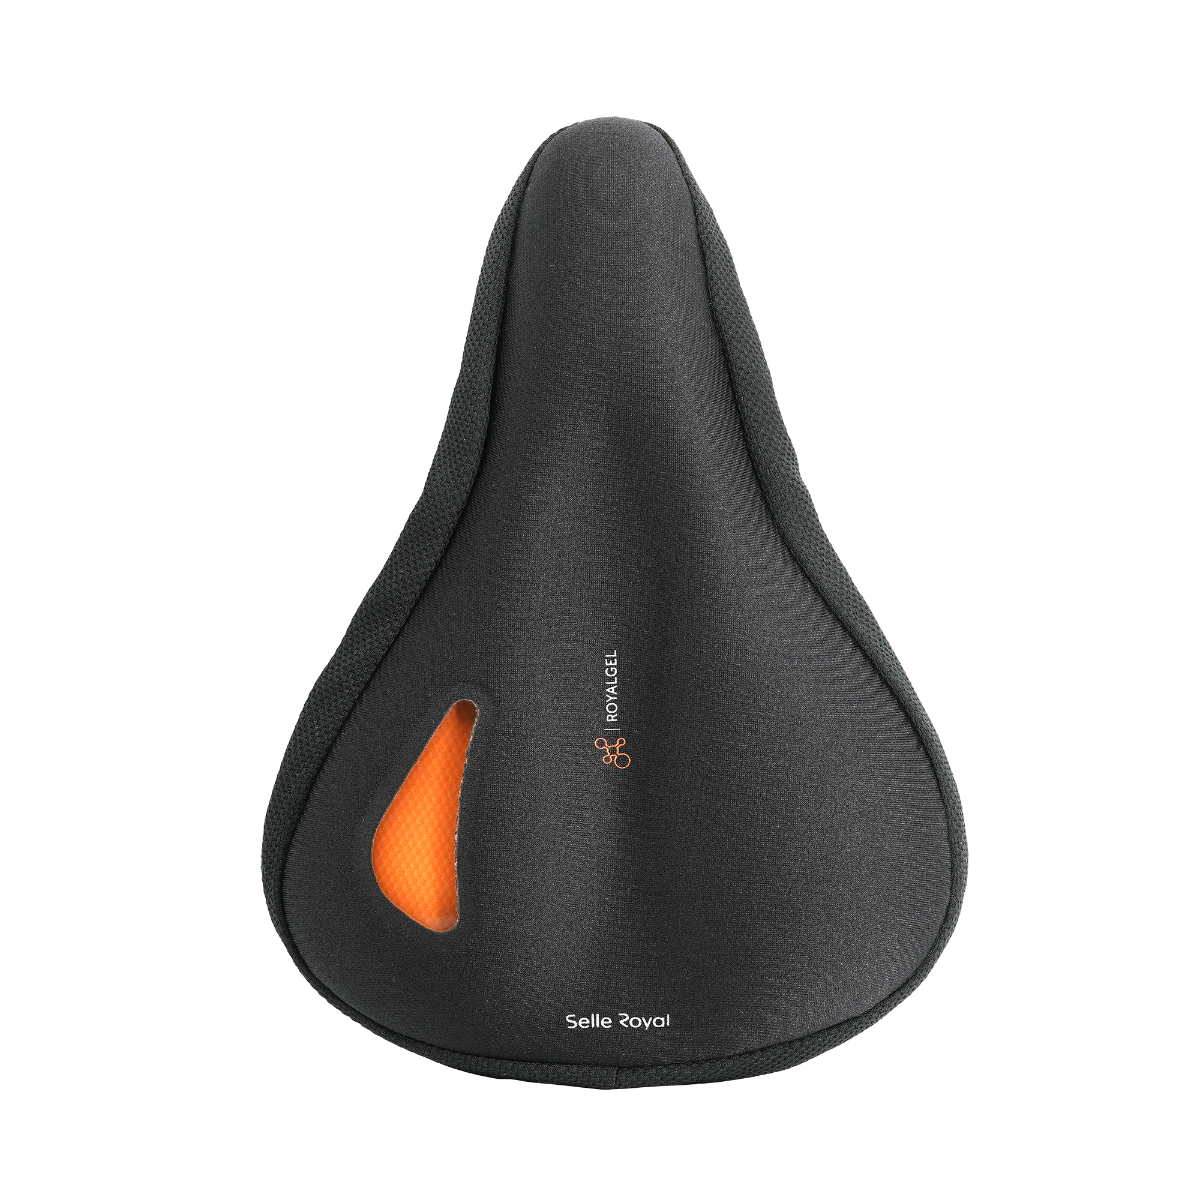 Seat - Royalgel Selle Small Cover Royal